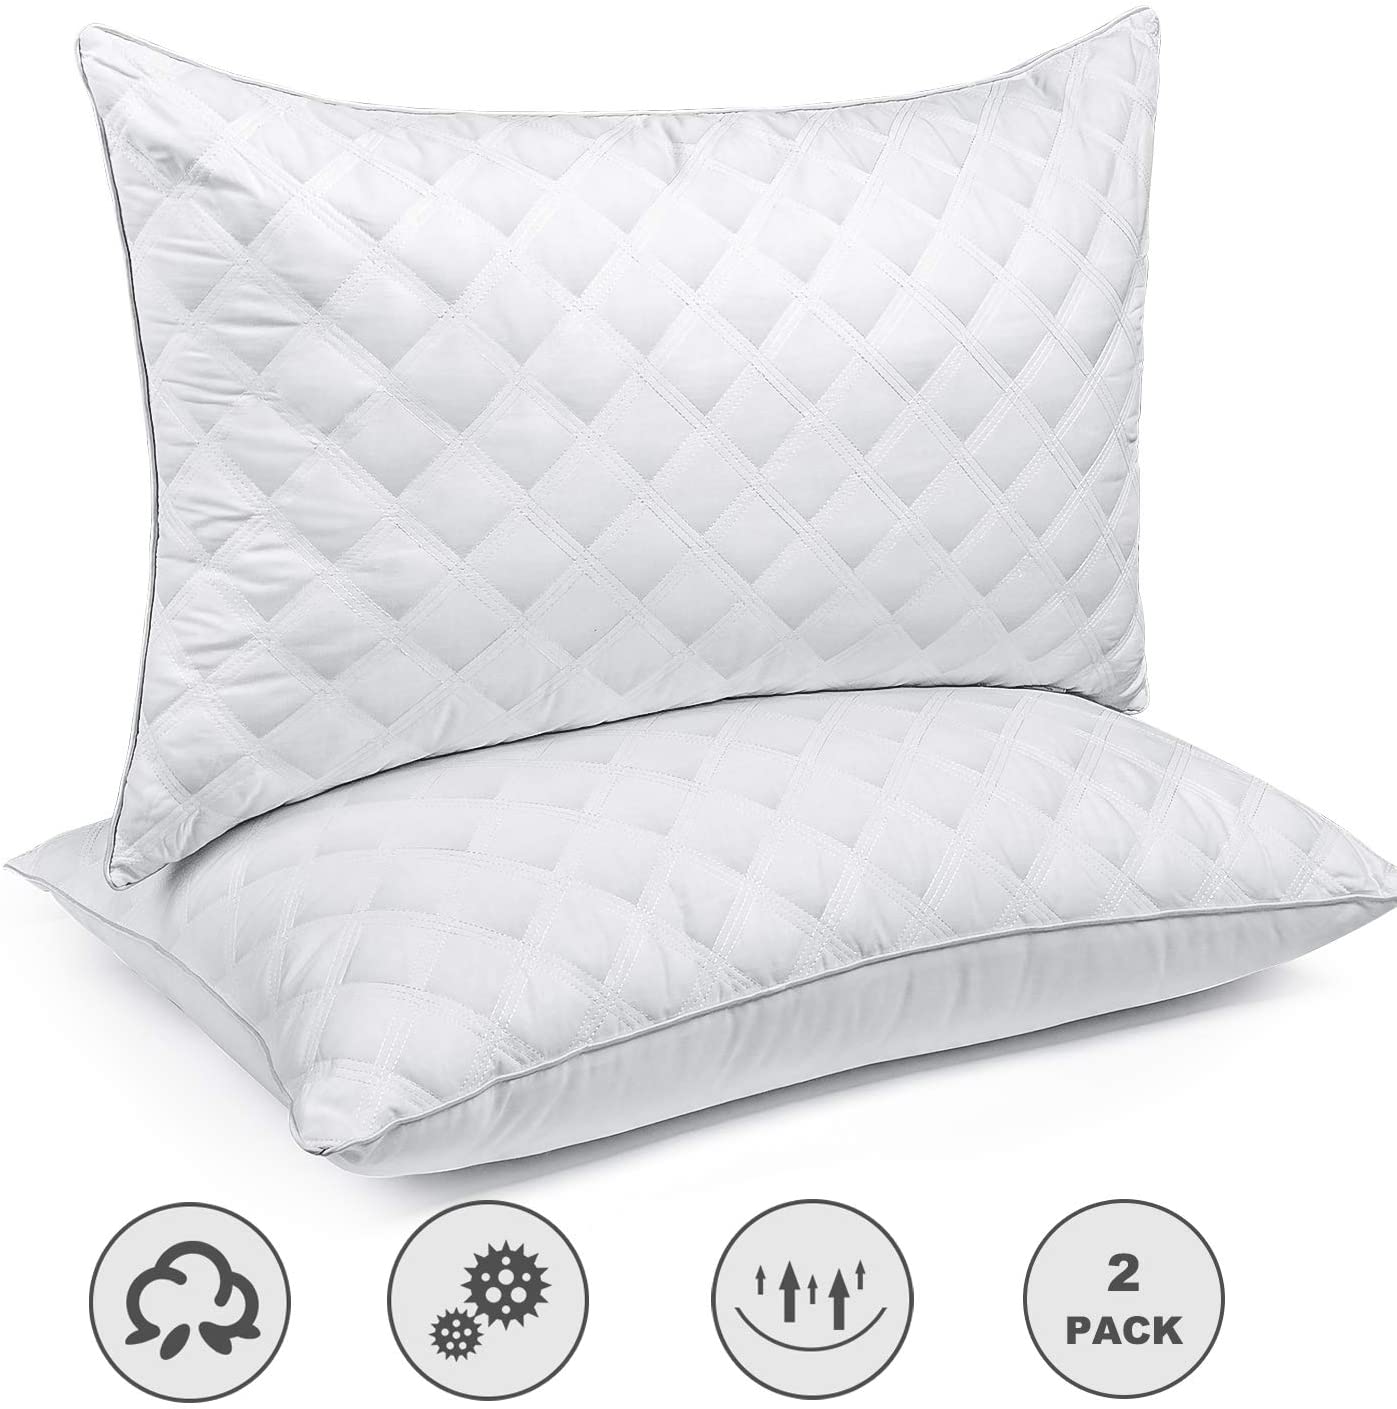 SORMAG Hypoallergenic King Size Pillows, Set Of 2